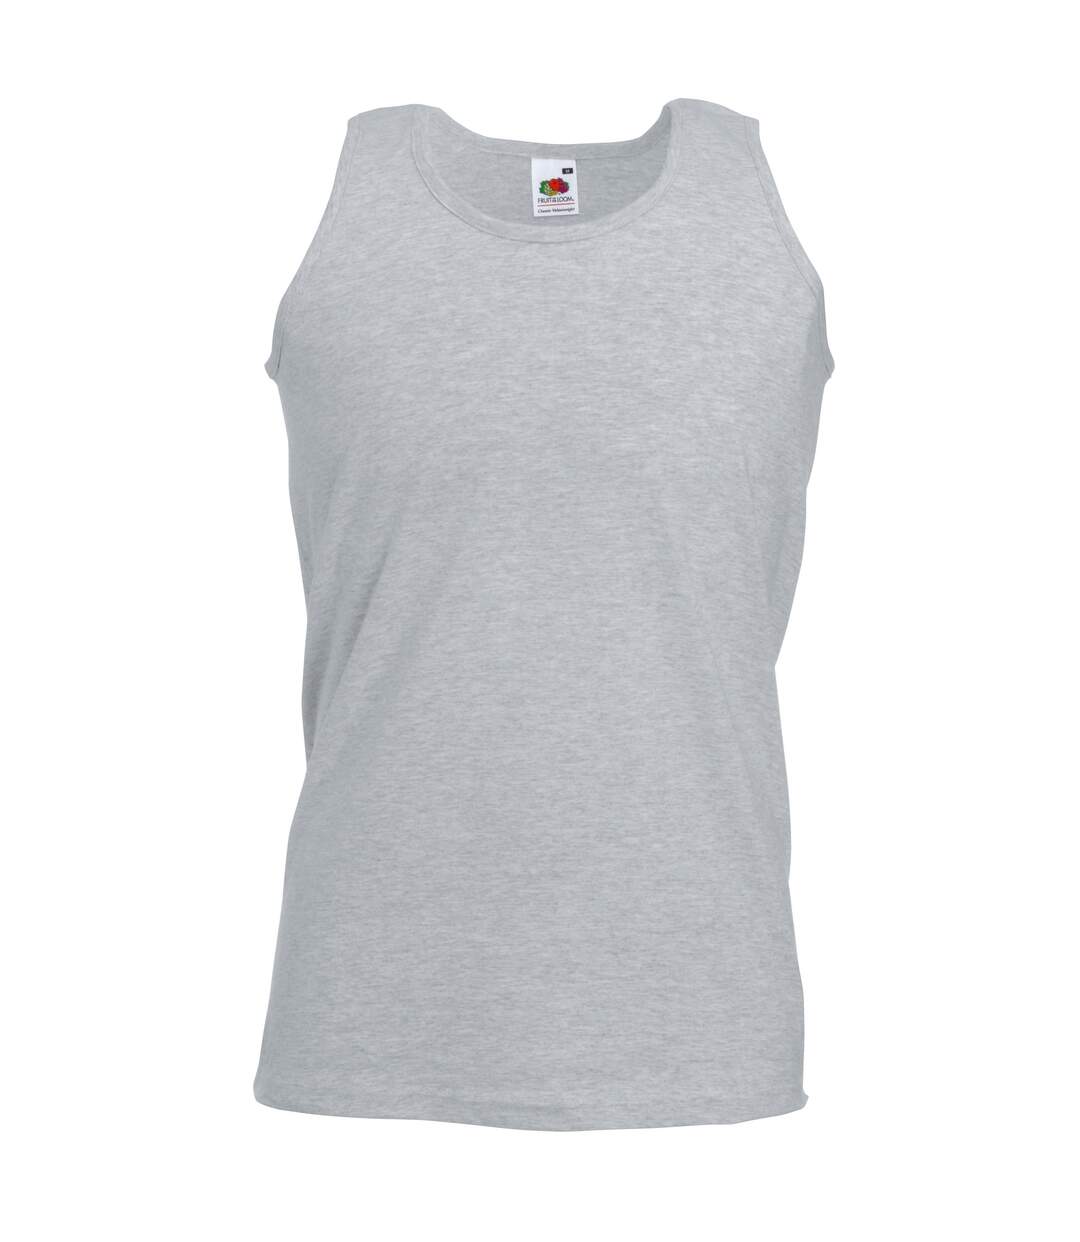 Fruit Of The Loom Mens Athletic Sleeveless Vest/Tank Top (Heather Gray)